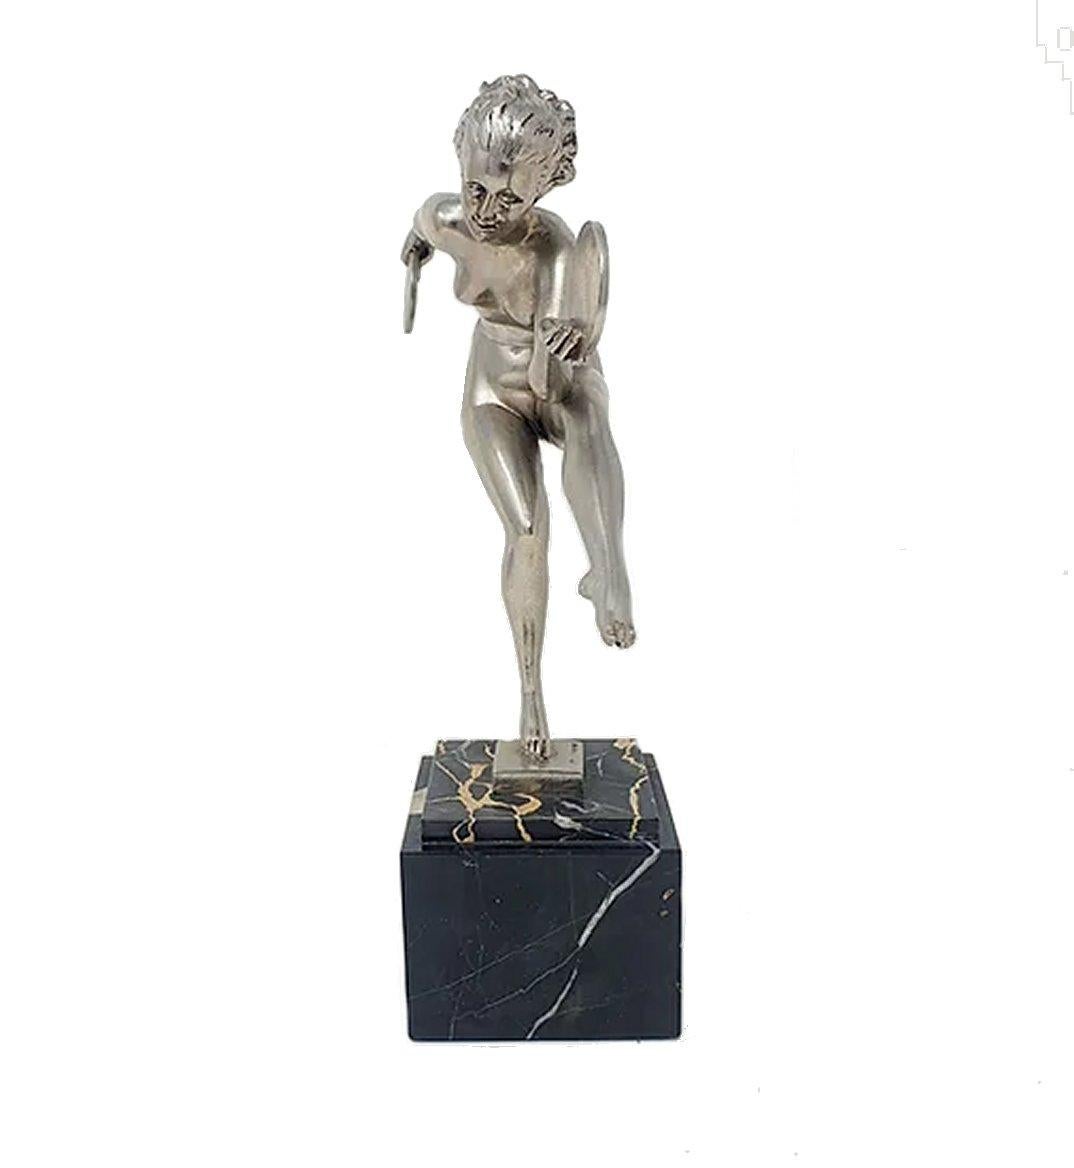 For your consideration is this original Stunning art deco dancer designed by Marcel Bouraine with the pseudonym of Derenne and signed accordingly. This piece is known Danse Païenne (Pagan Dance) and was made in the Max Le Verrier foundry. It is